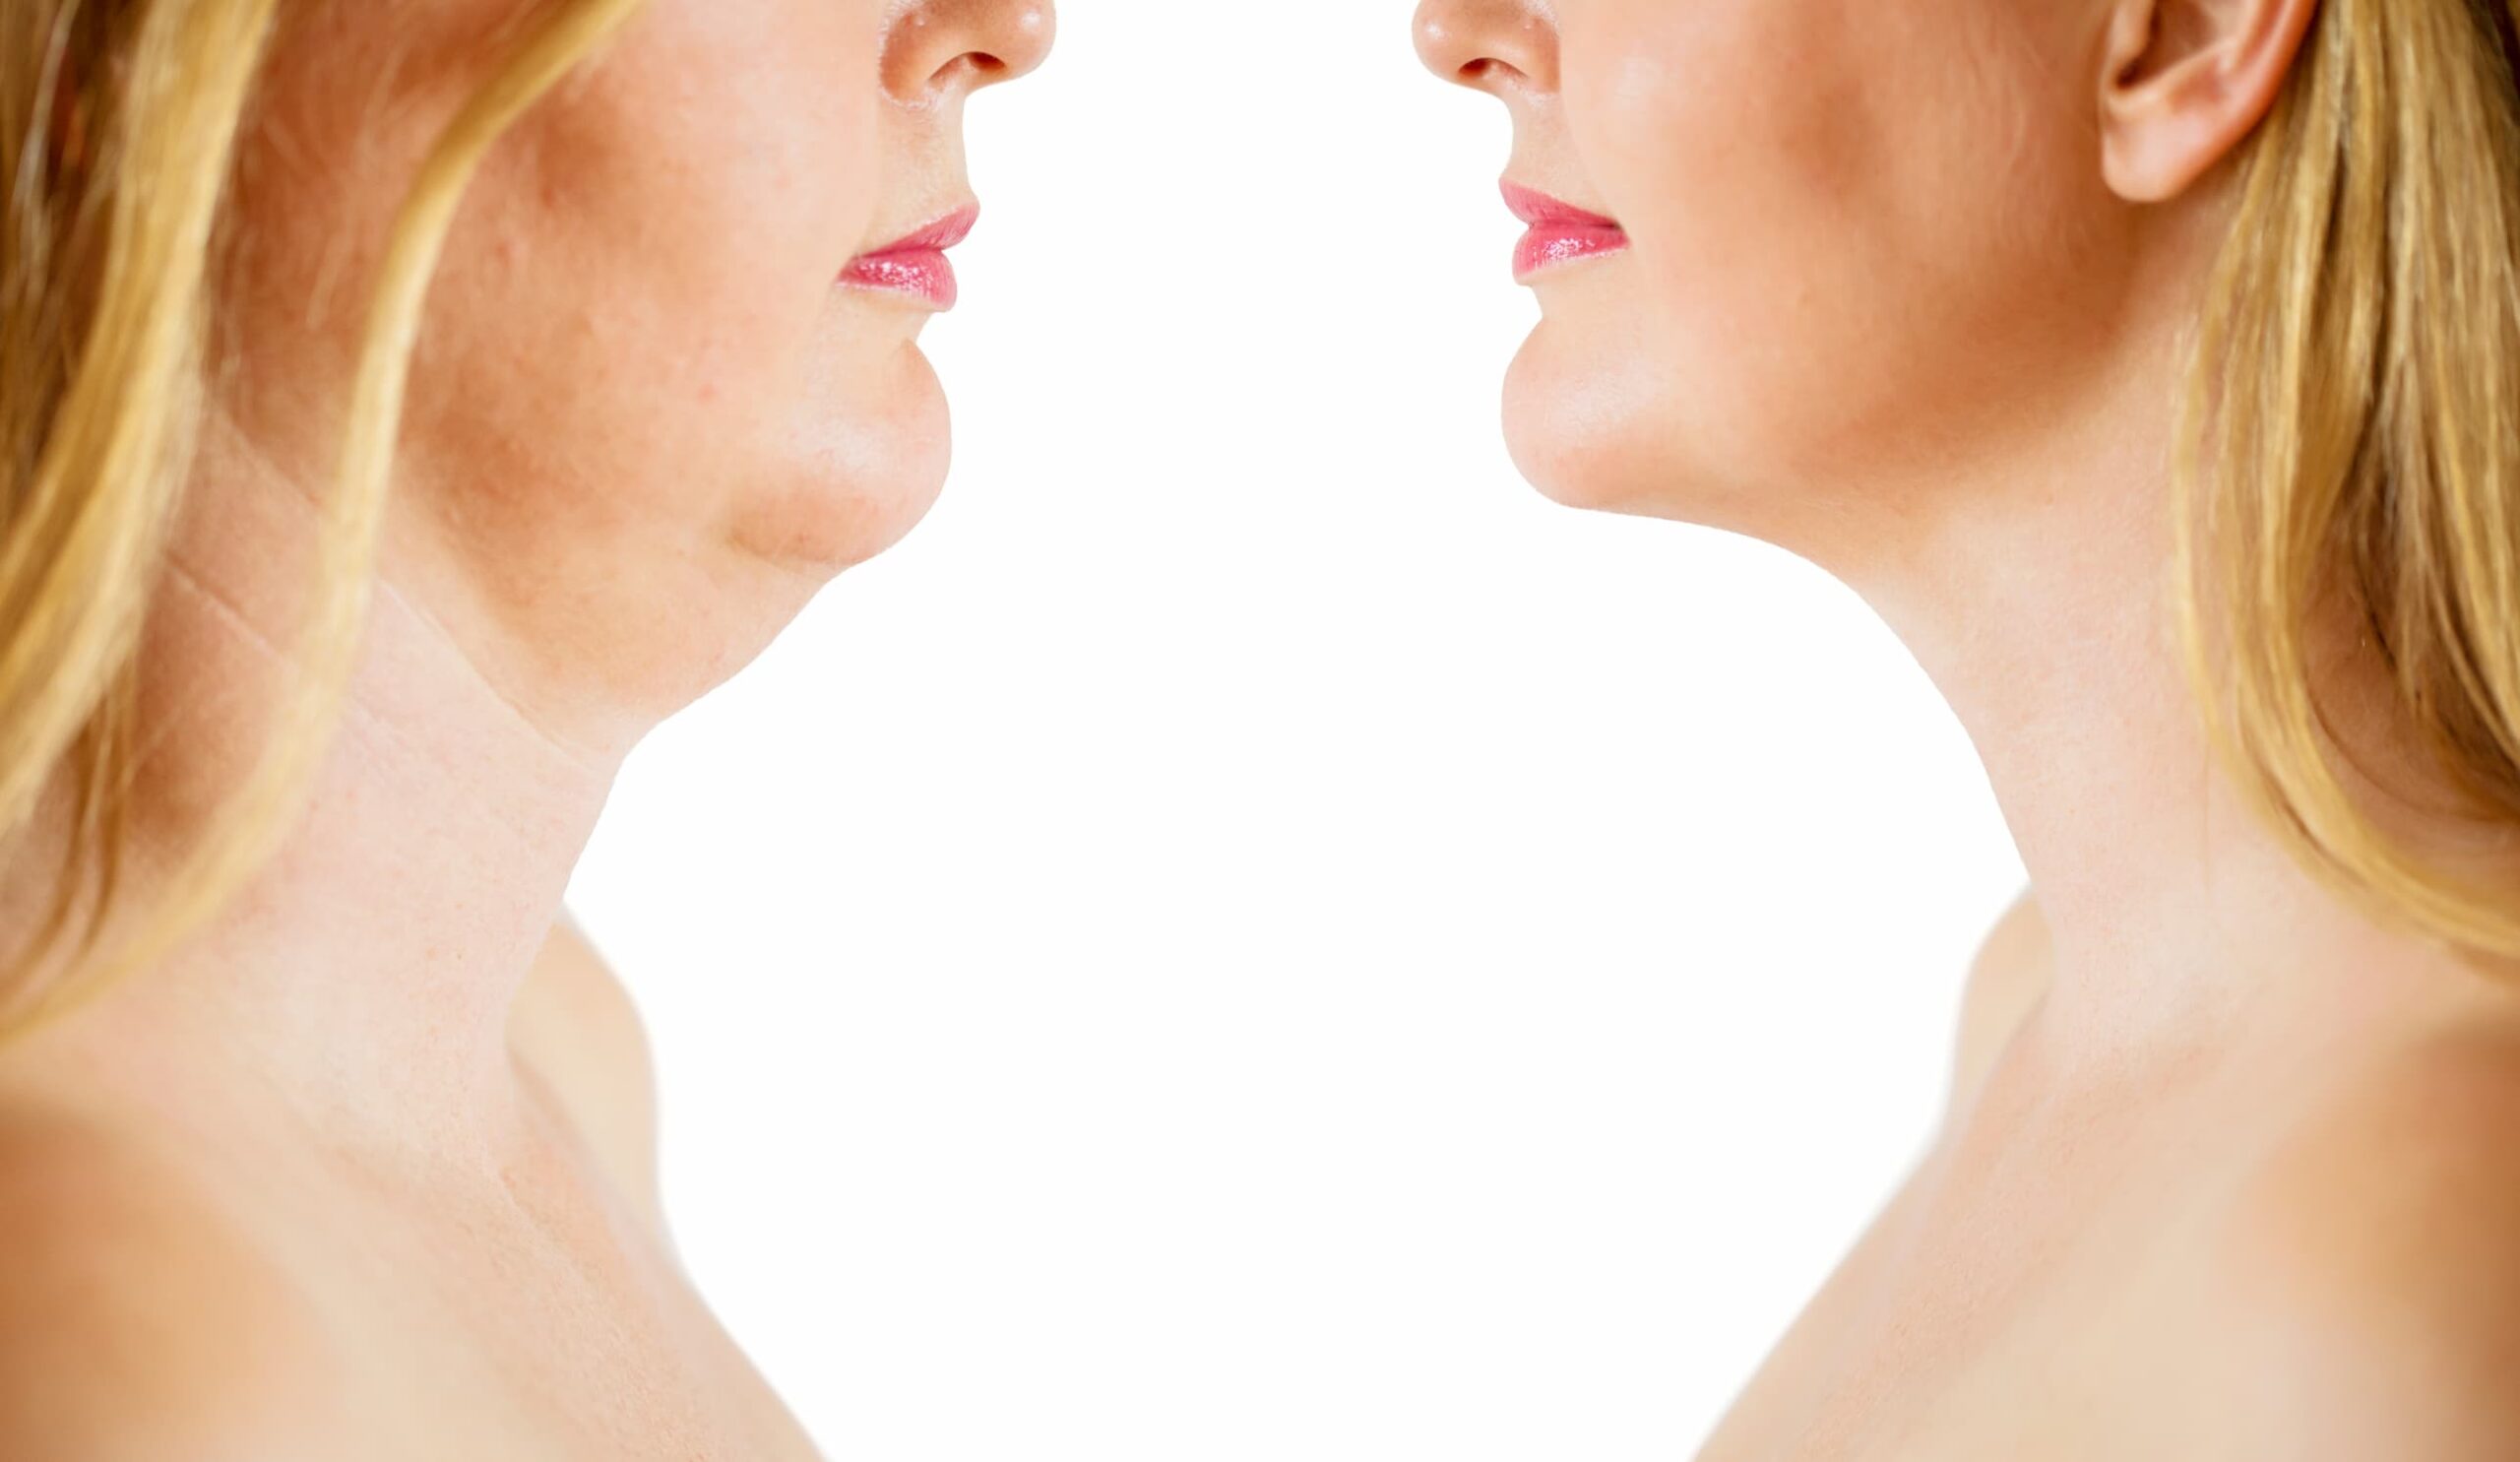 Profiles of a woman of two different weights facing herself.